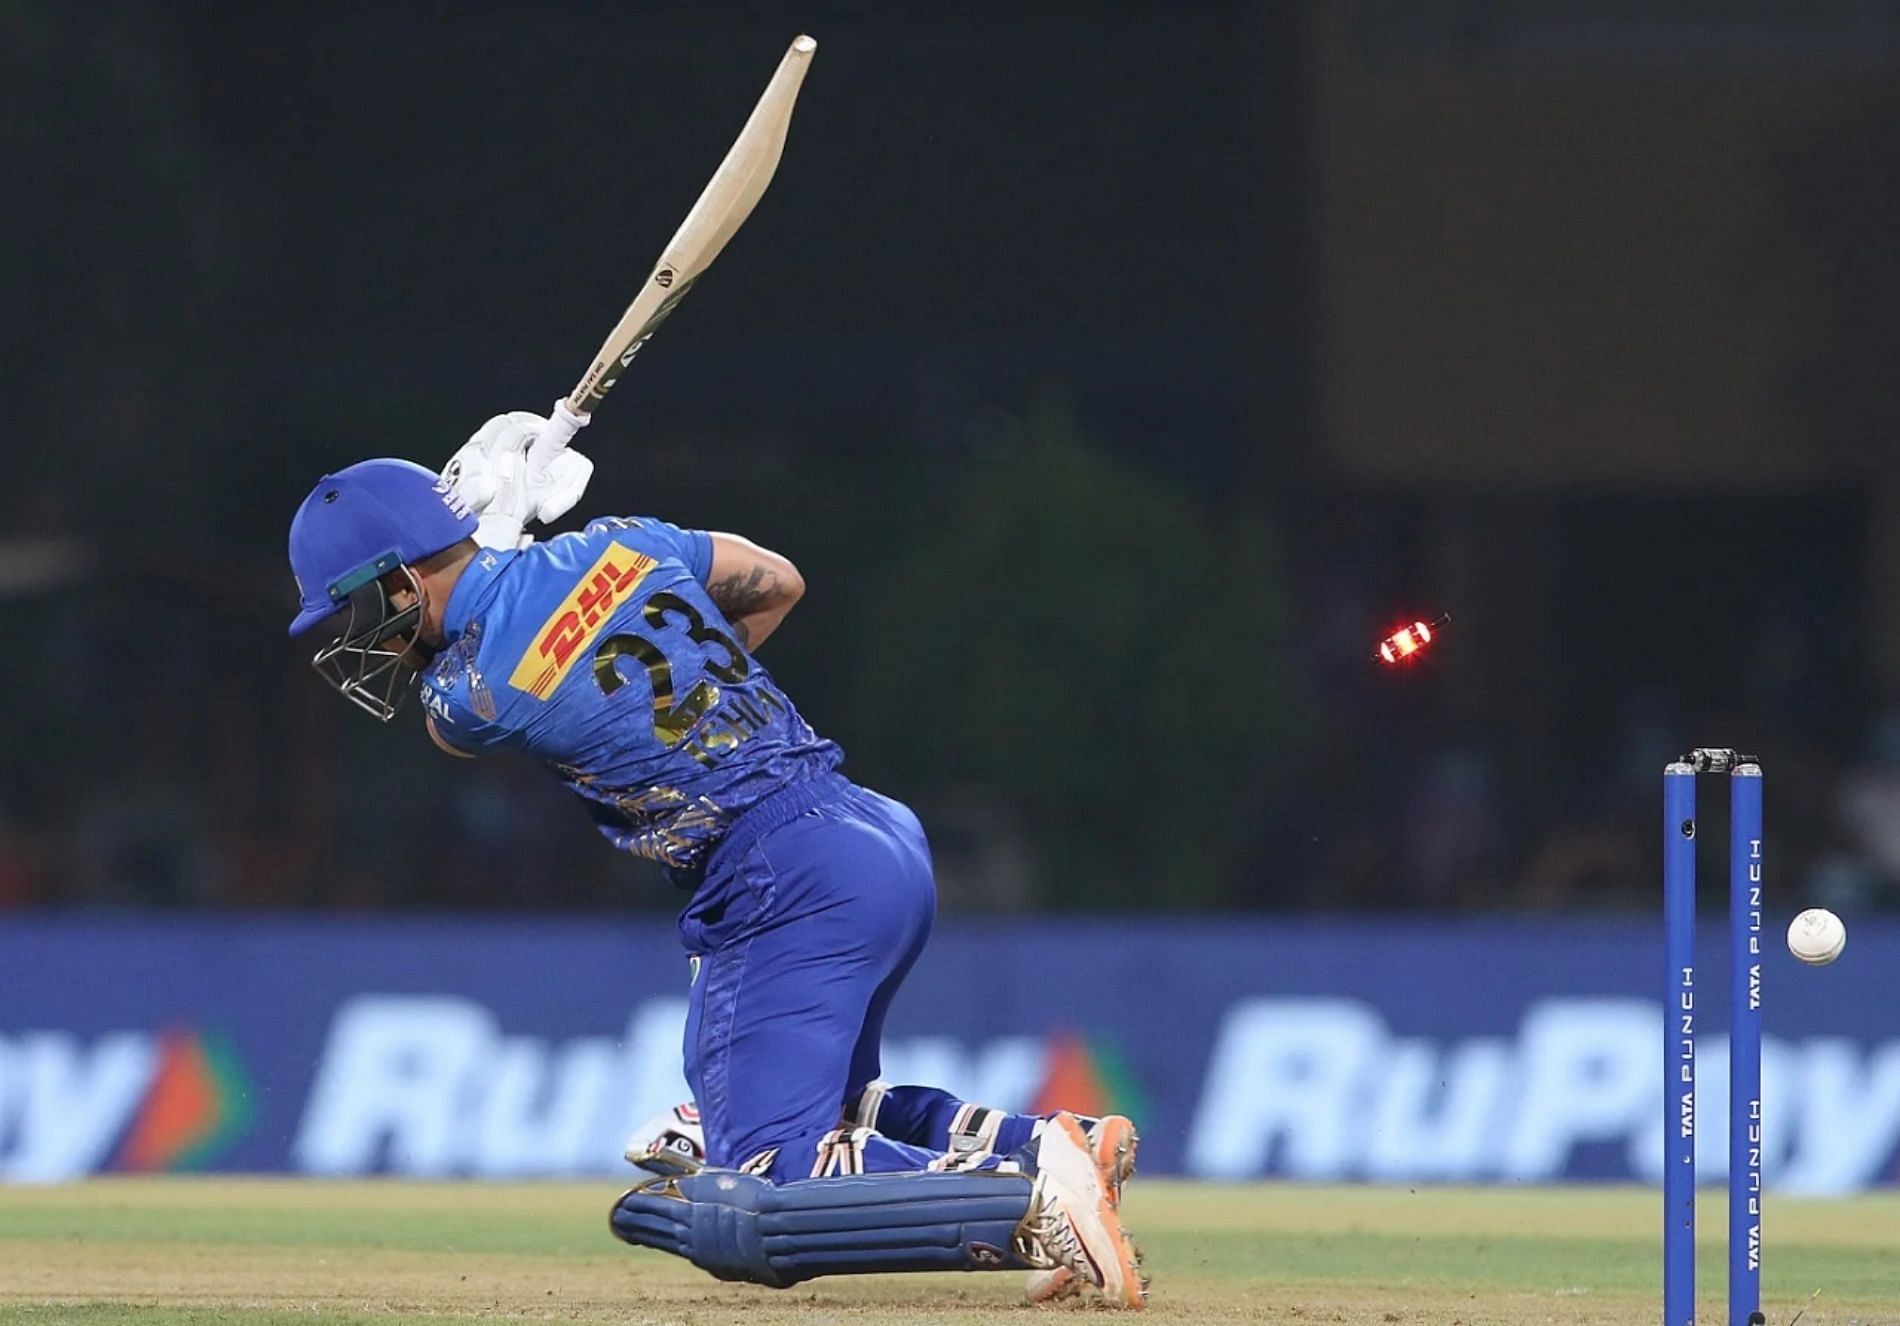 Ishan Kishan has not lived up to the hype in IPL 2022. Pic: IPLT20.COM